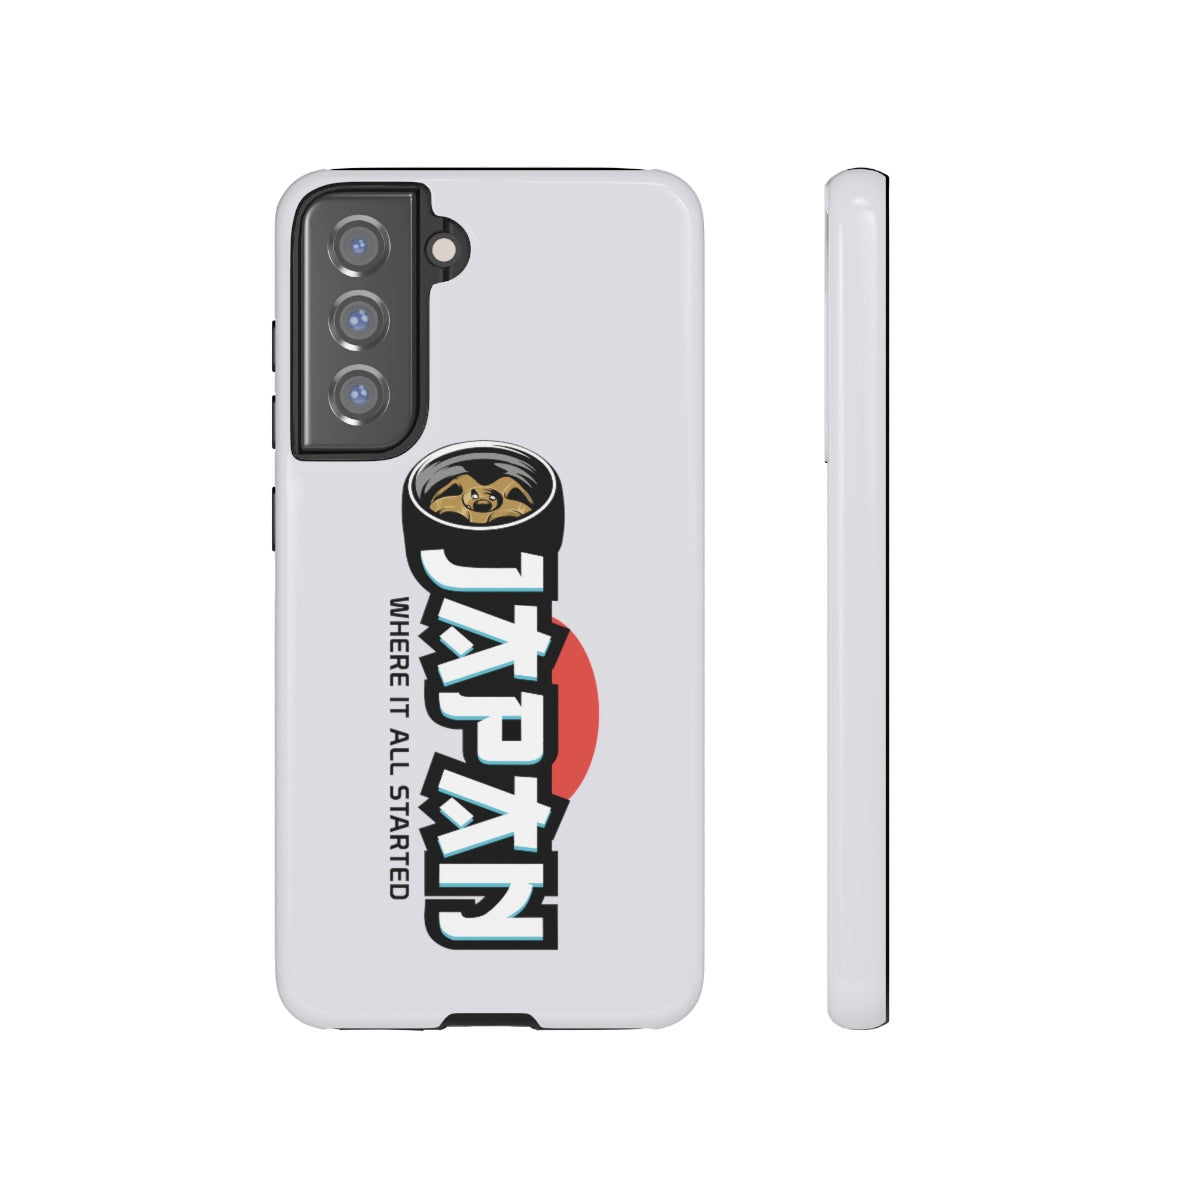 Japan - Where It All Started - Car Phone Case - Samsung Galaxy S21 FE